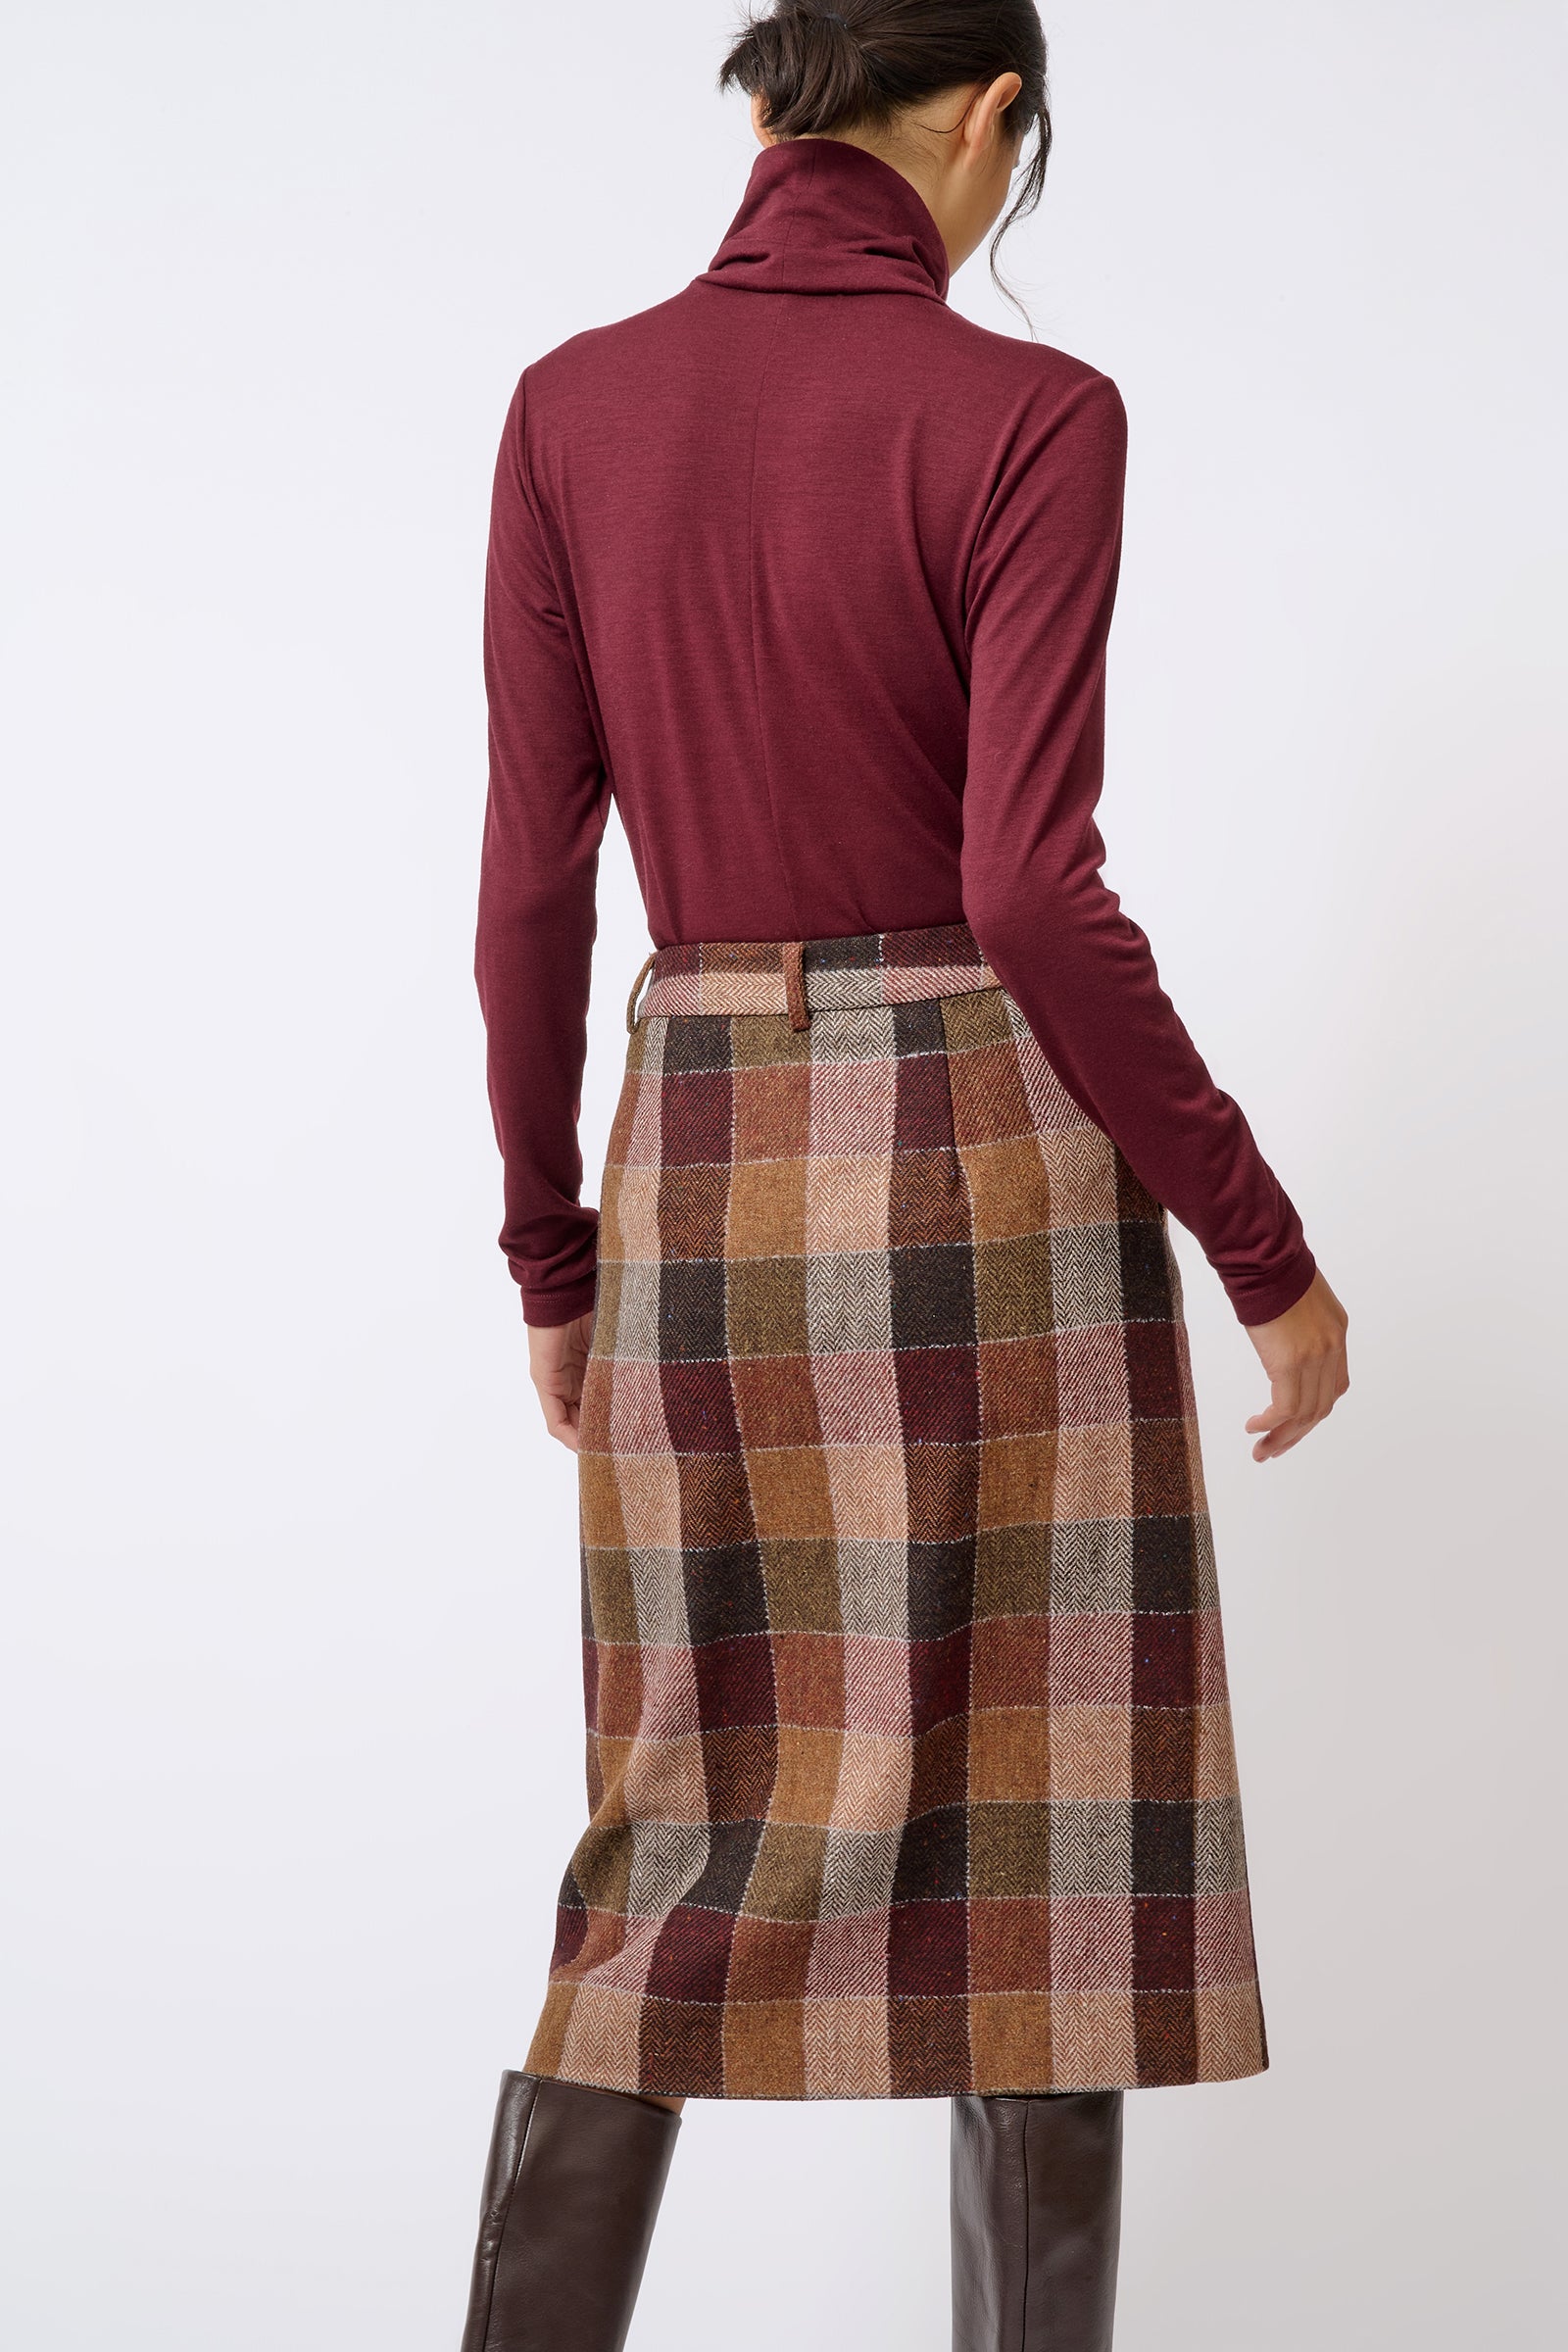 Kal Rieman Caroline Trouser Skirt in Patchwork Fabric on Model with Hand in Pocket Full Front View